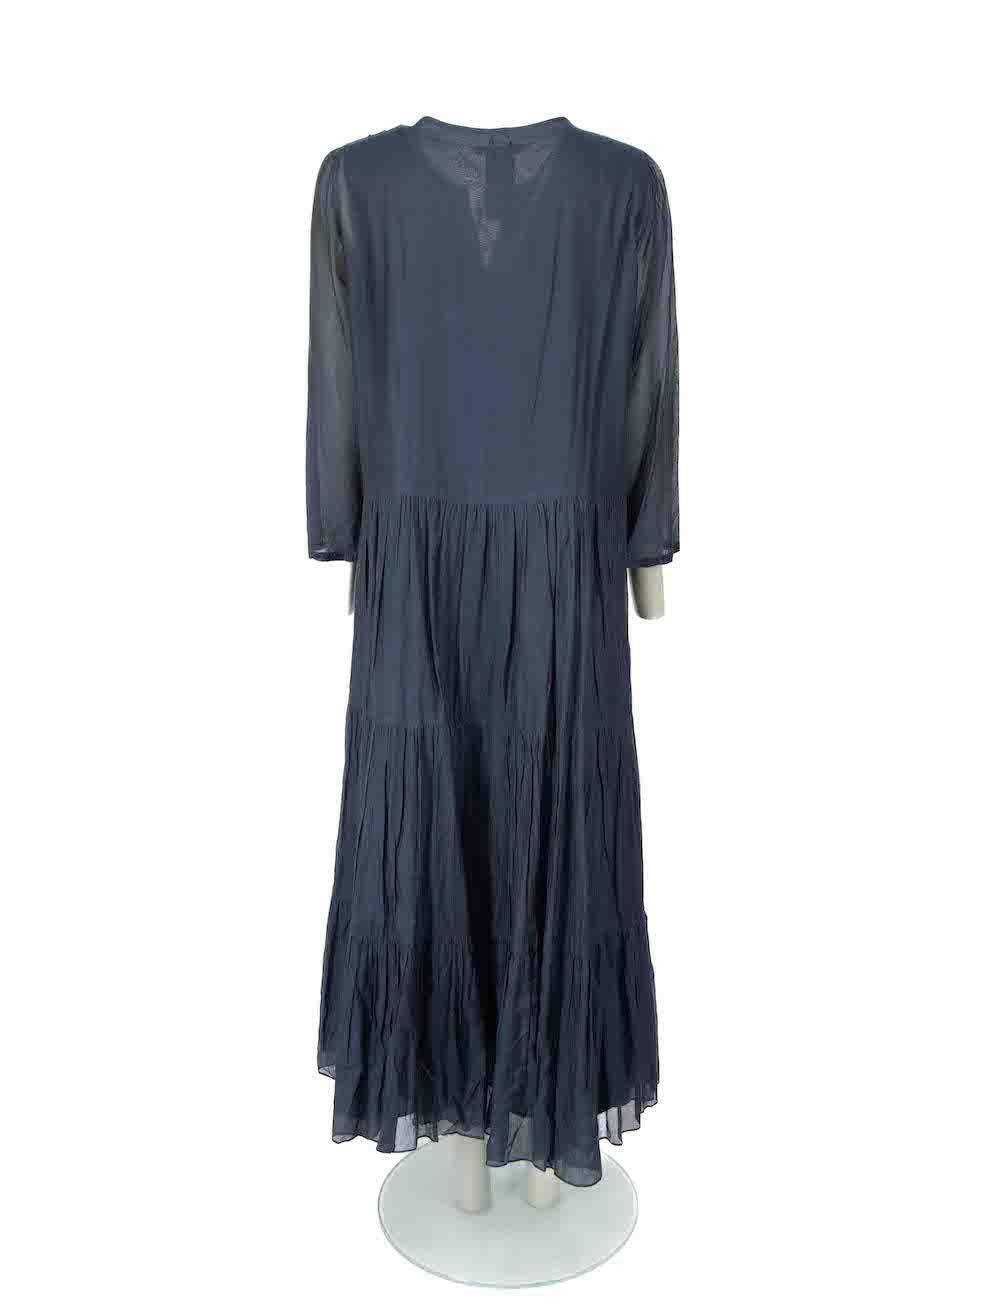 Max Mara Navy Tiered Midi Dress Size L In Excellent Condition For Sale In London, GB